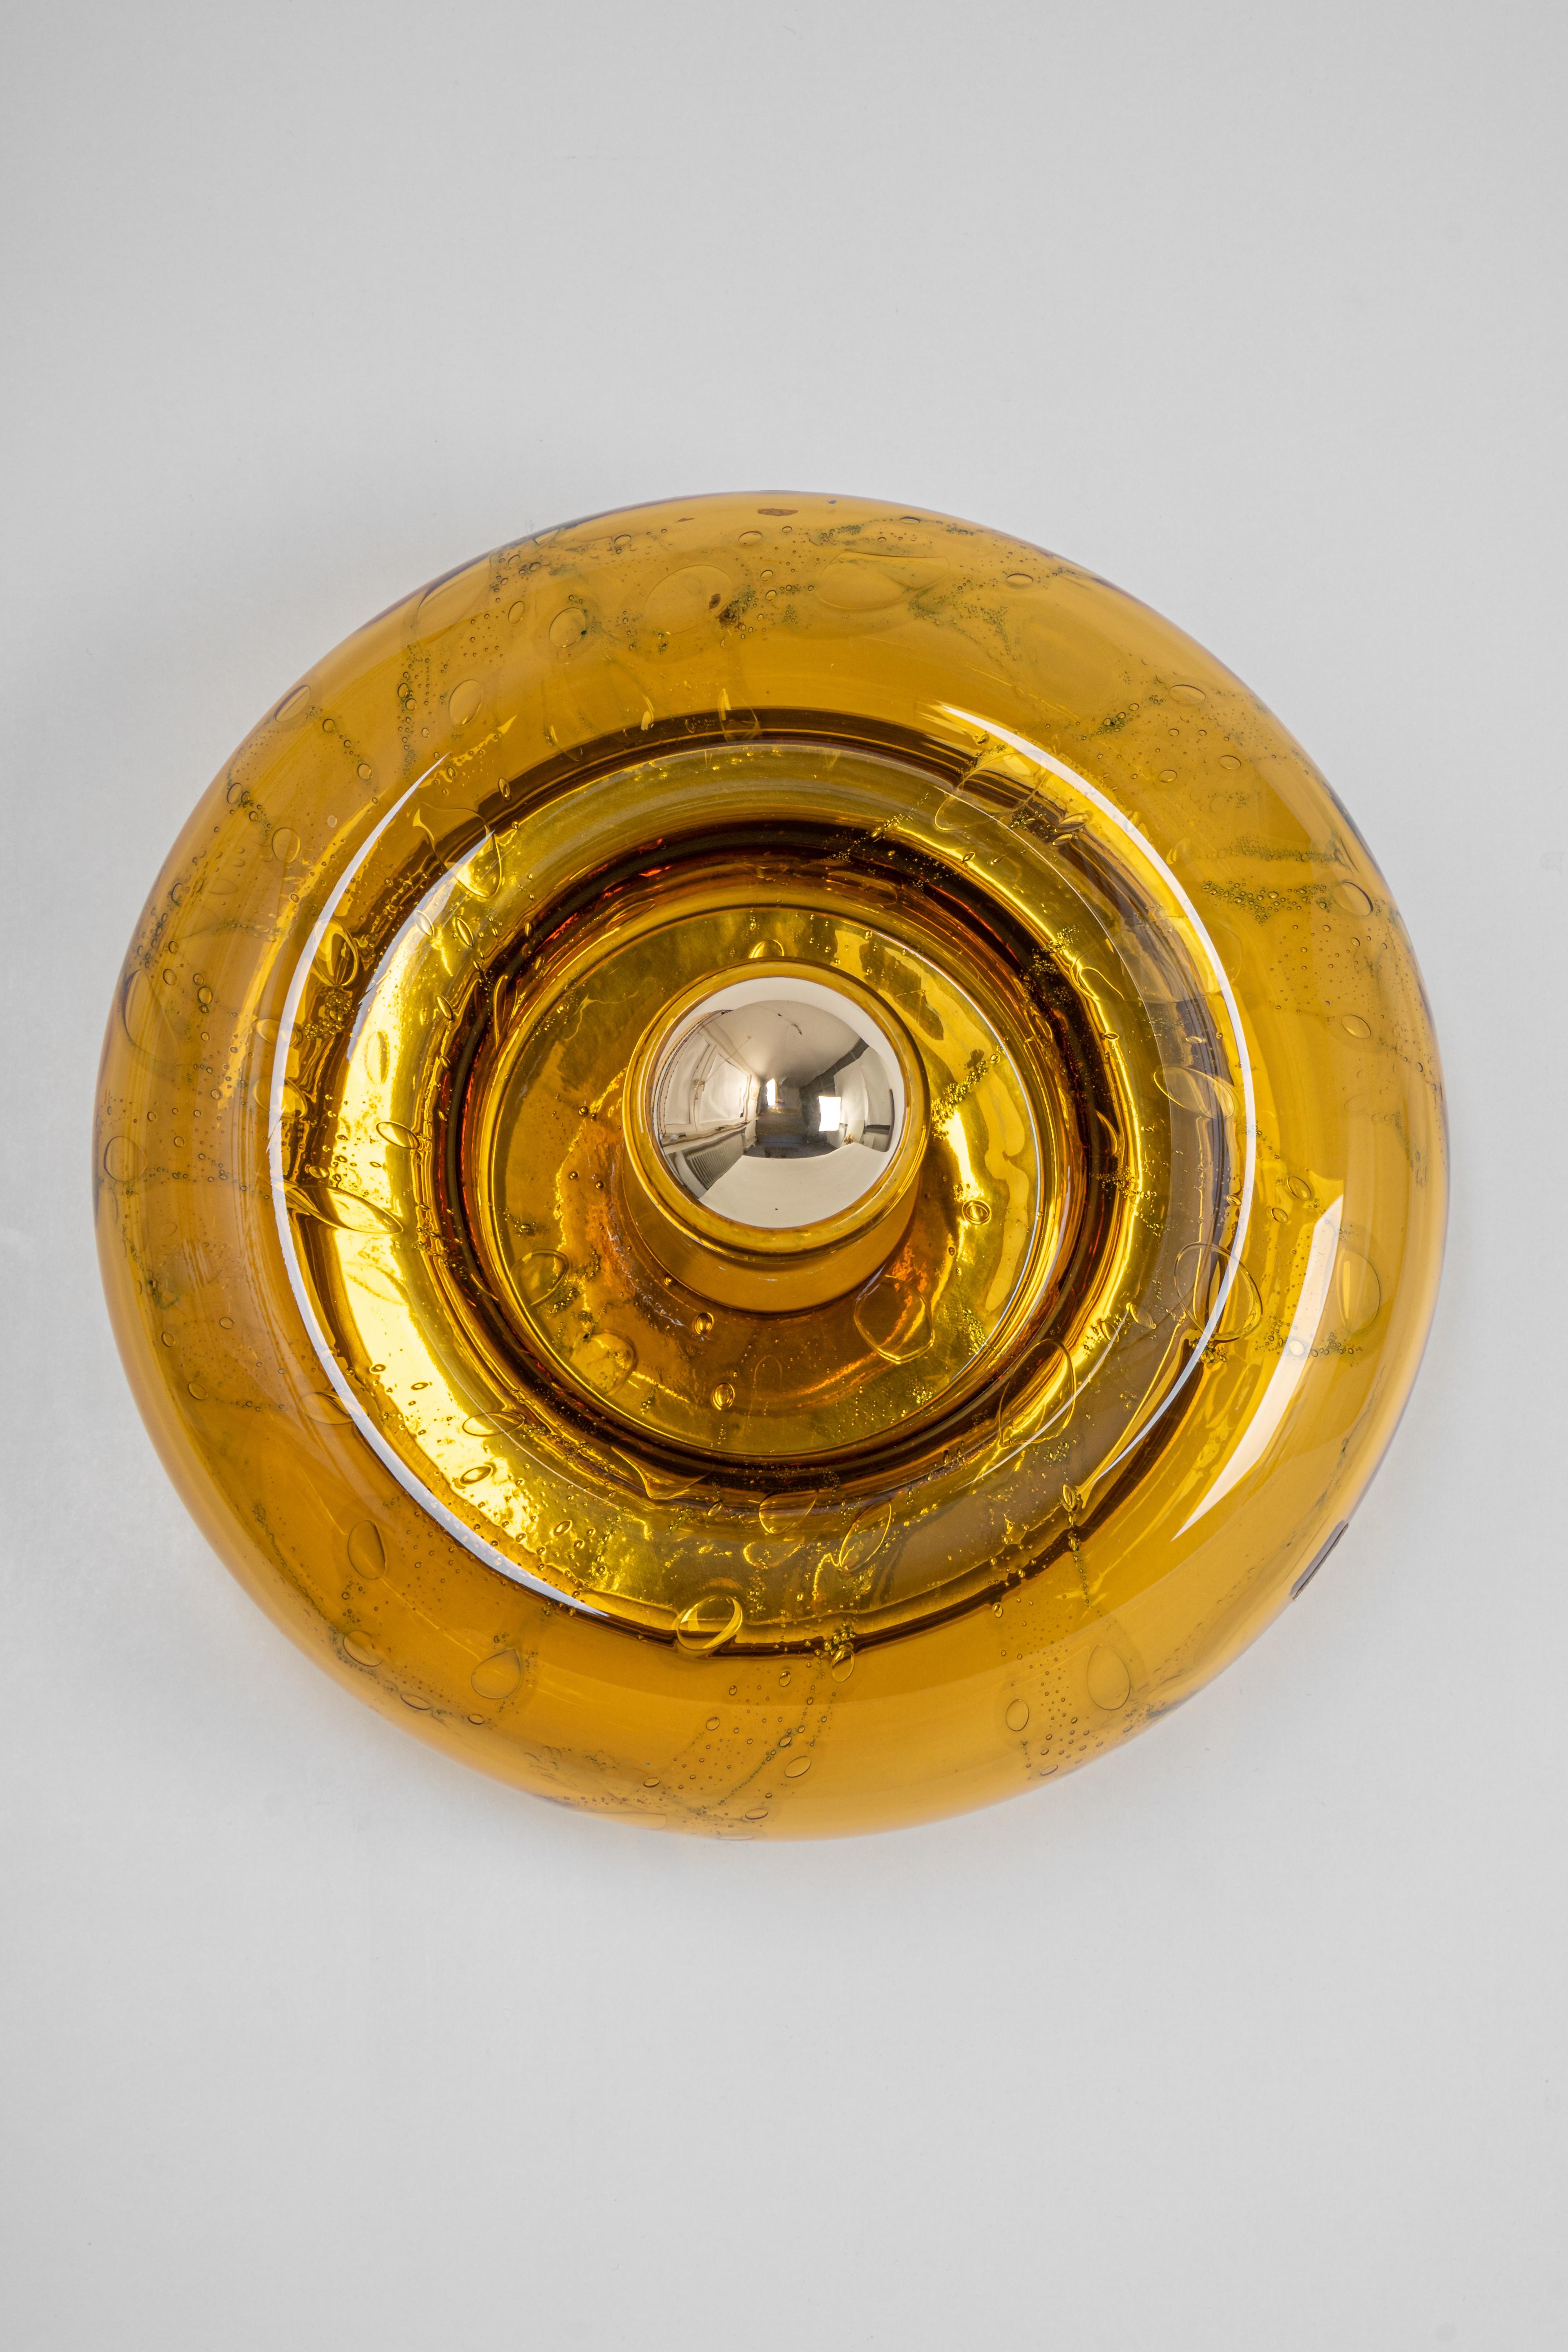 1 of 6 special round biomorphic smoked Murano glass wall light in Doughnut shape designed Doria Leuchten, Germany, manufactured, circa 1960-1969.
High quality, good condition.
Very nice light effect.
Cleaned, well-wired, and ready to use.

Each